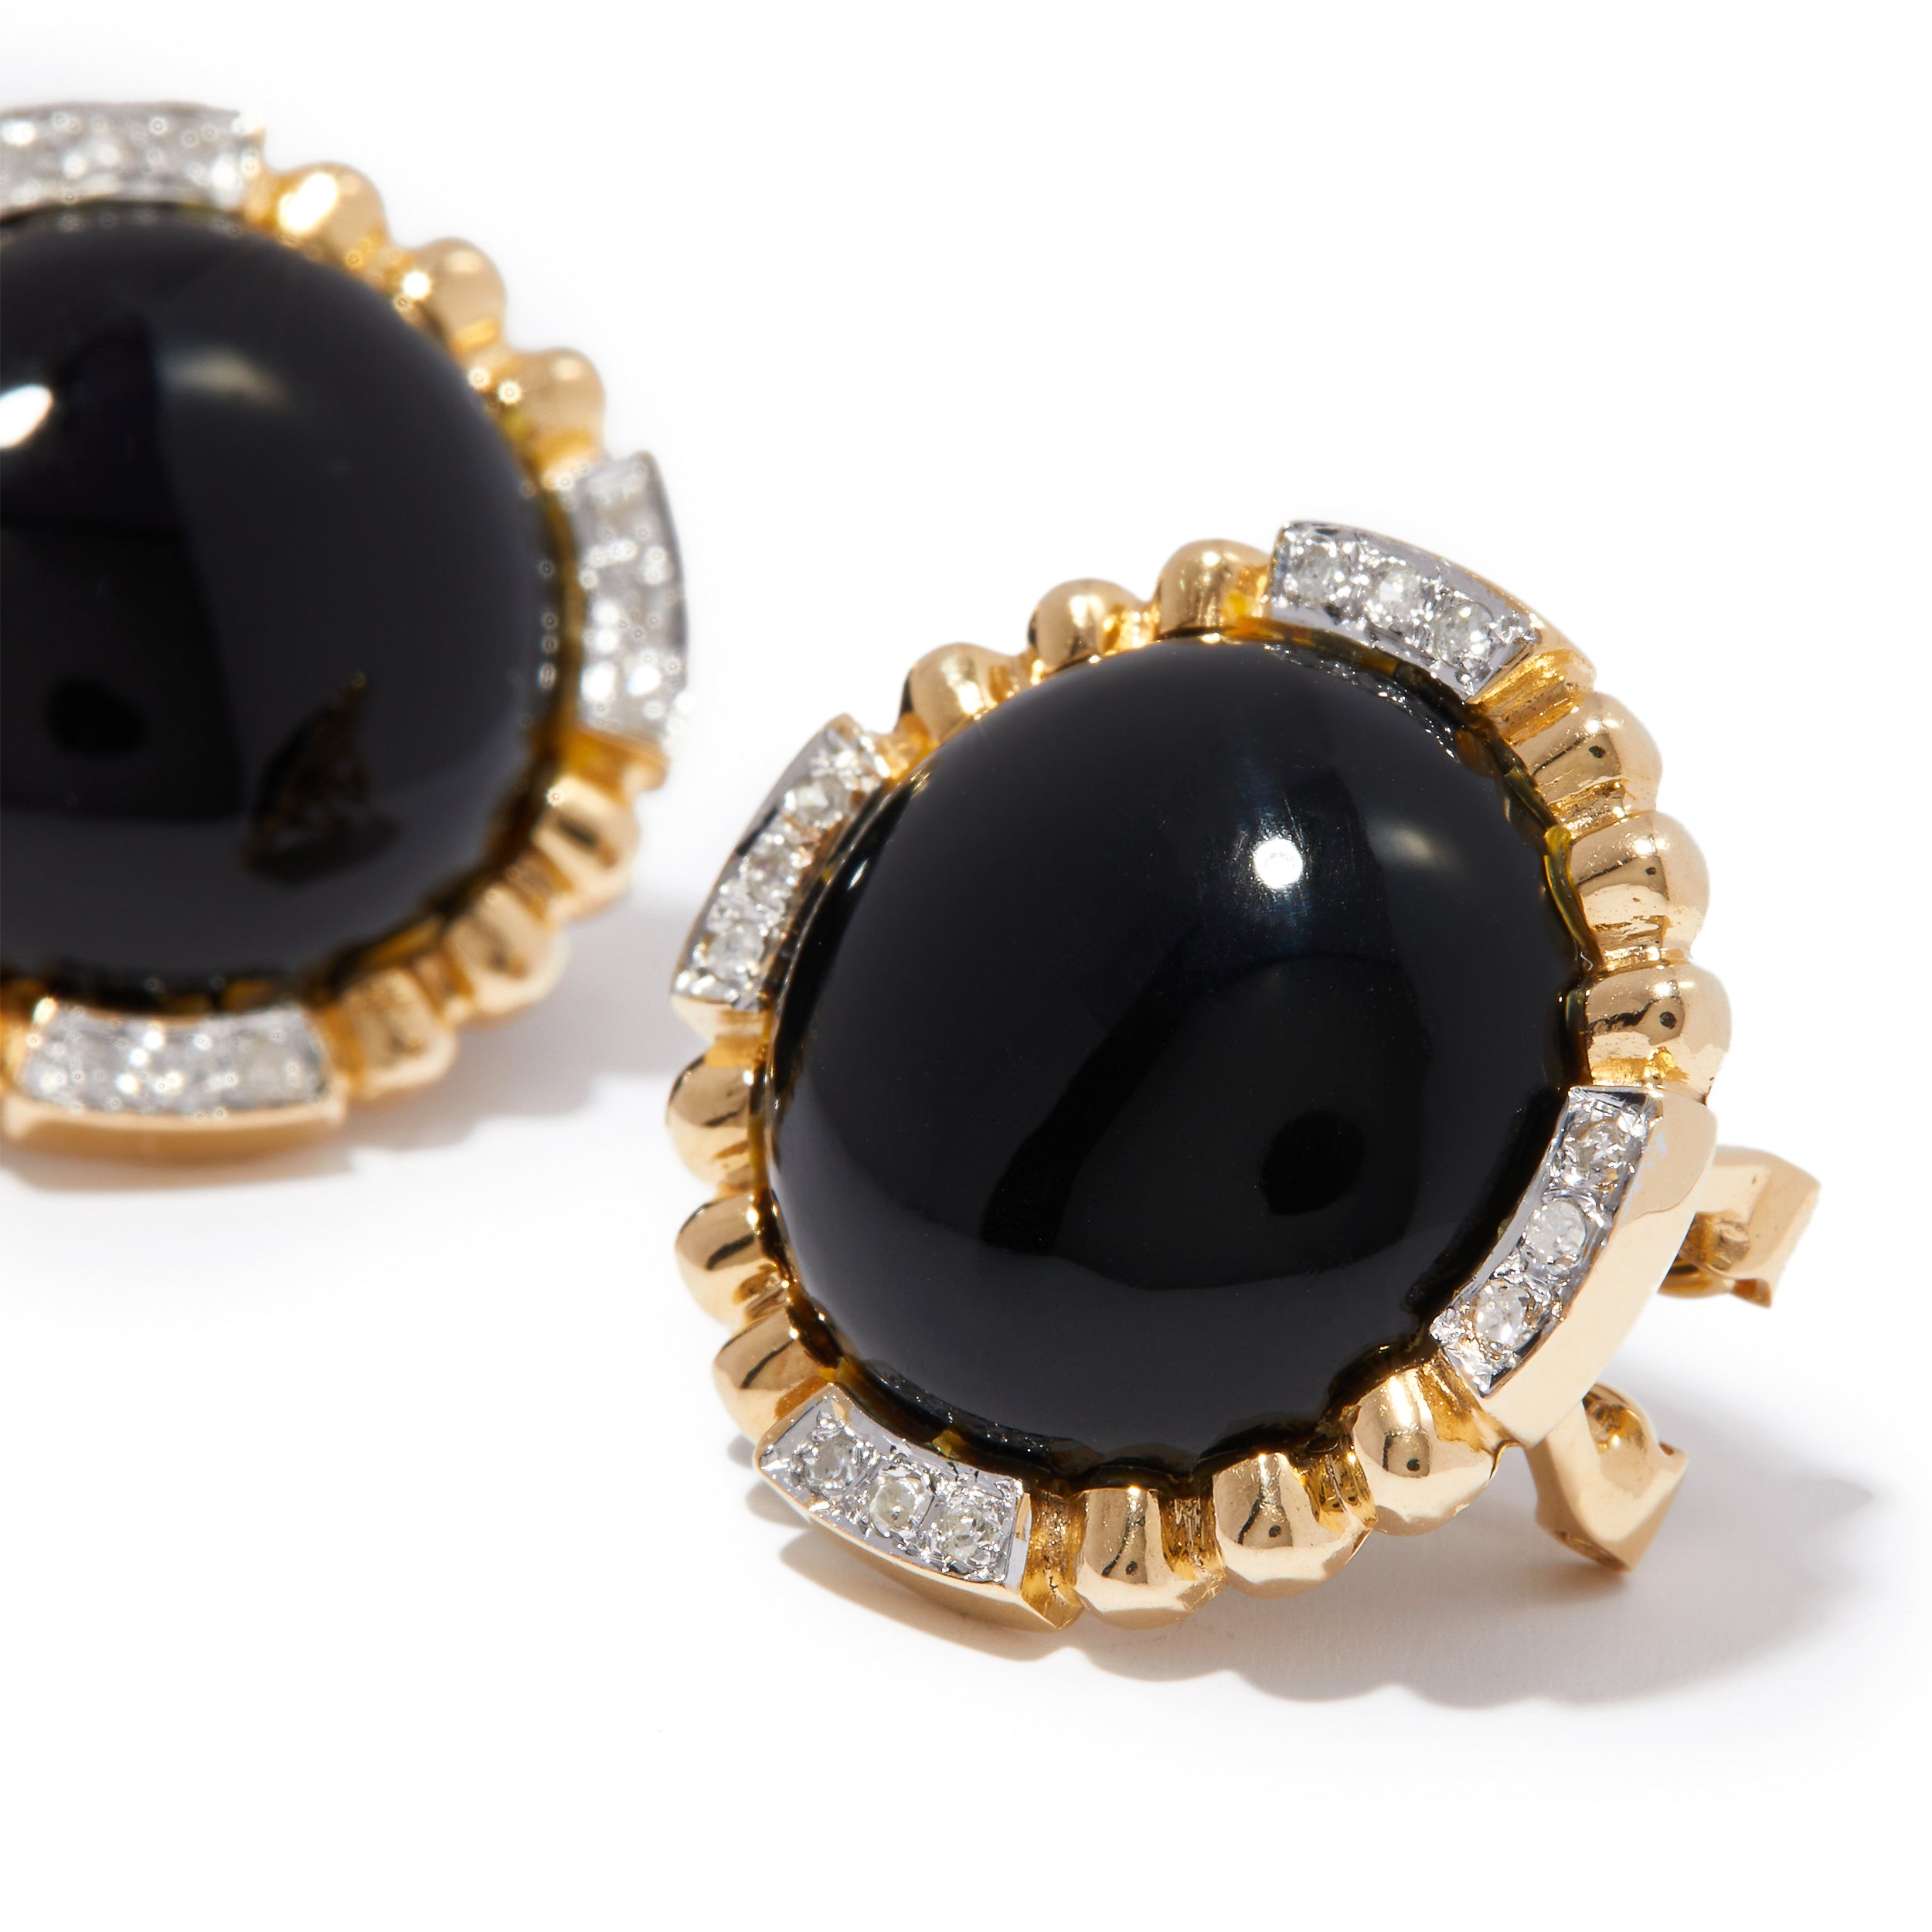 Side view of black glass button earrings in 14ct gold and diamonds.